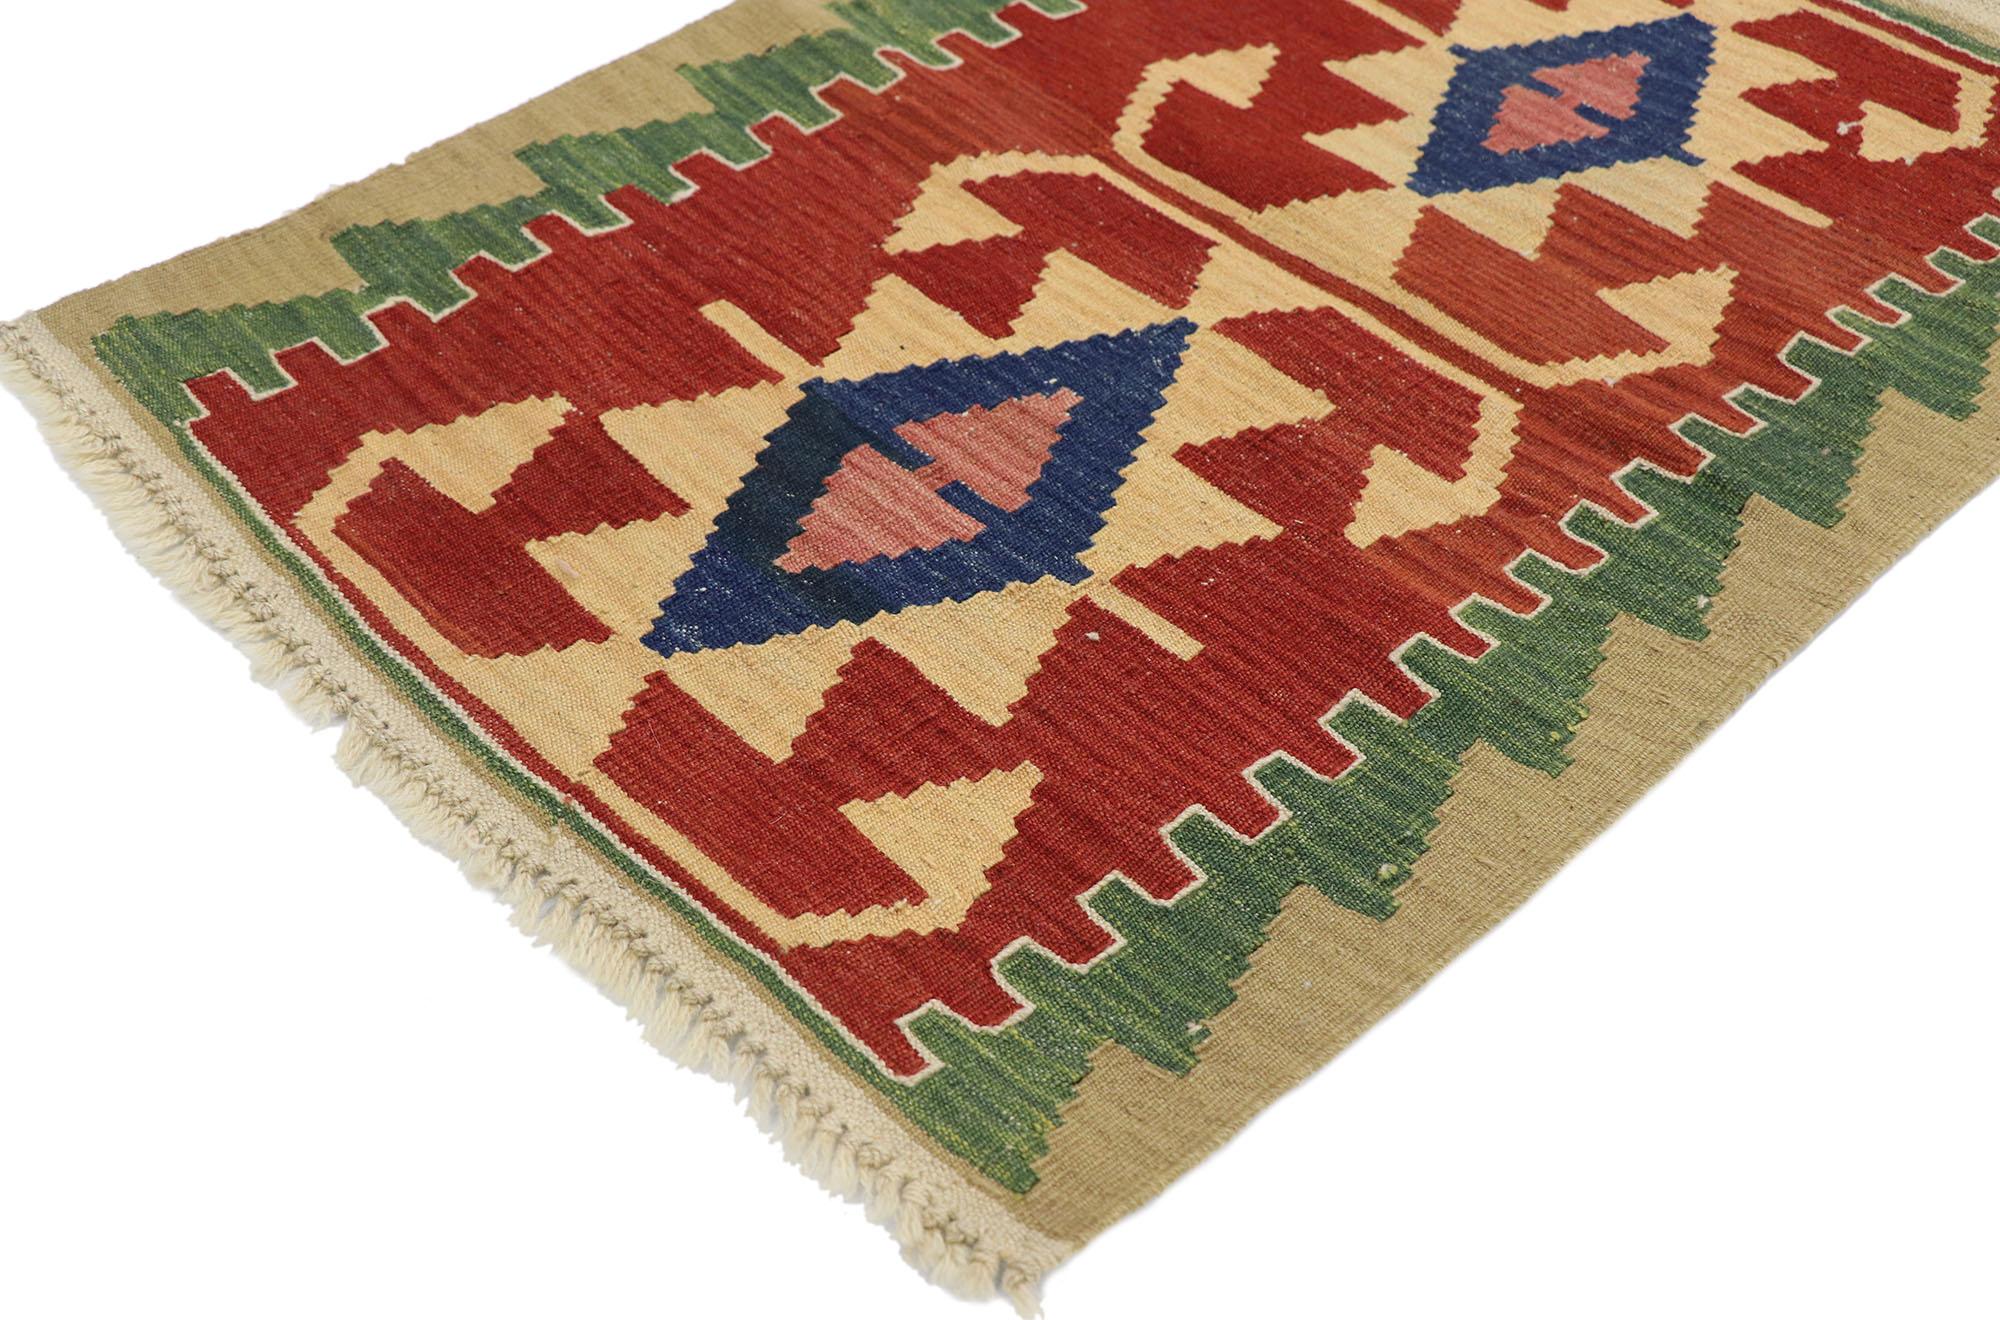 77877, Vintage Persian Shiraz Kilim rug with Tribal Style 02'02 x 03'00. Full of tiny details and a bold expressive design combined with vibrant colors and tribal style, this hand-woven wool vintage Persian Shiraz kilim rug is a captivating vision